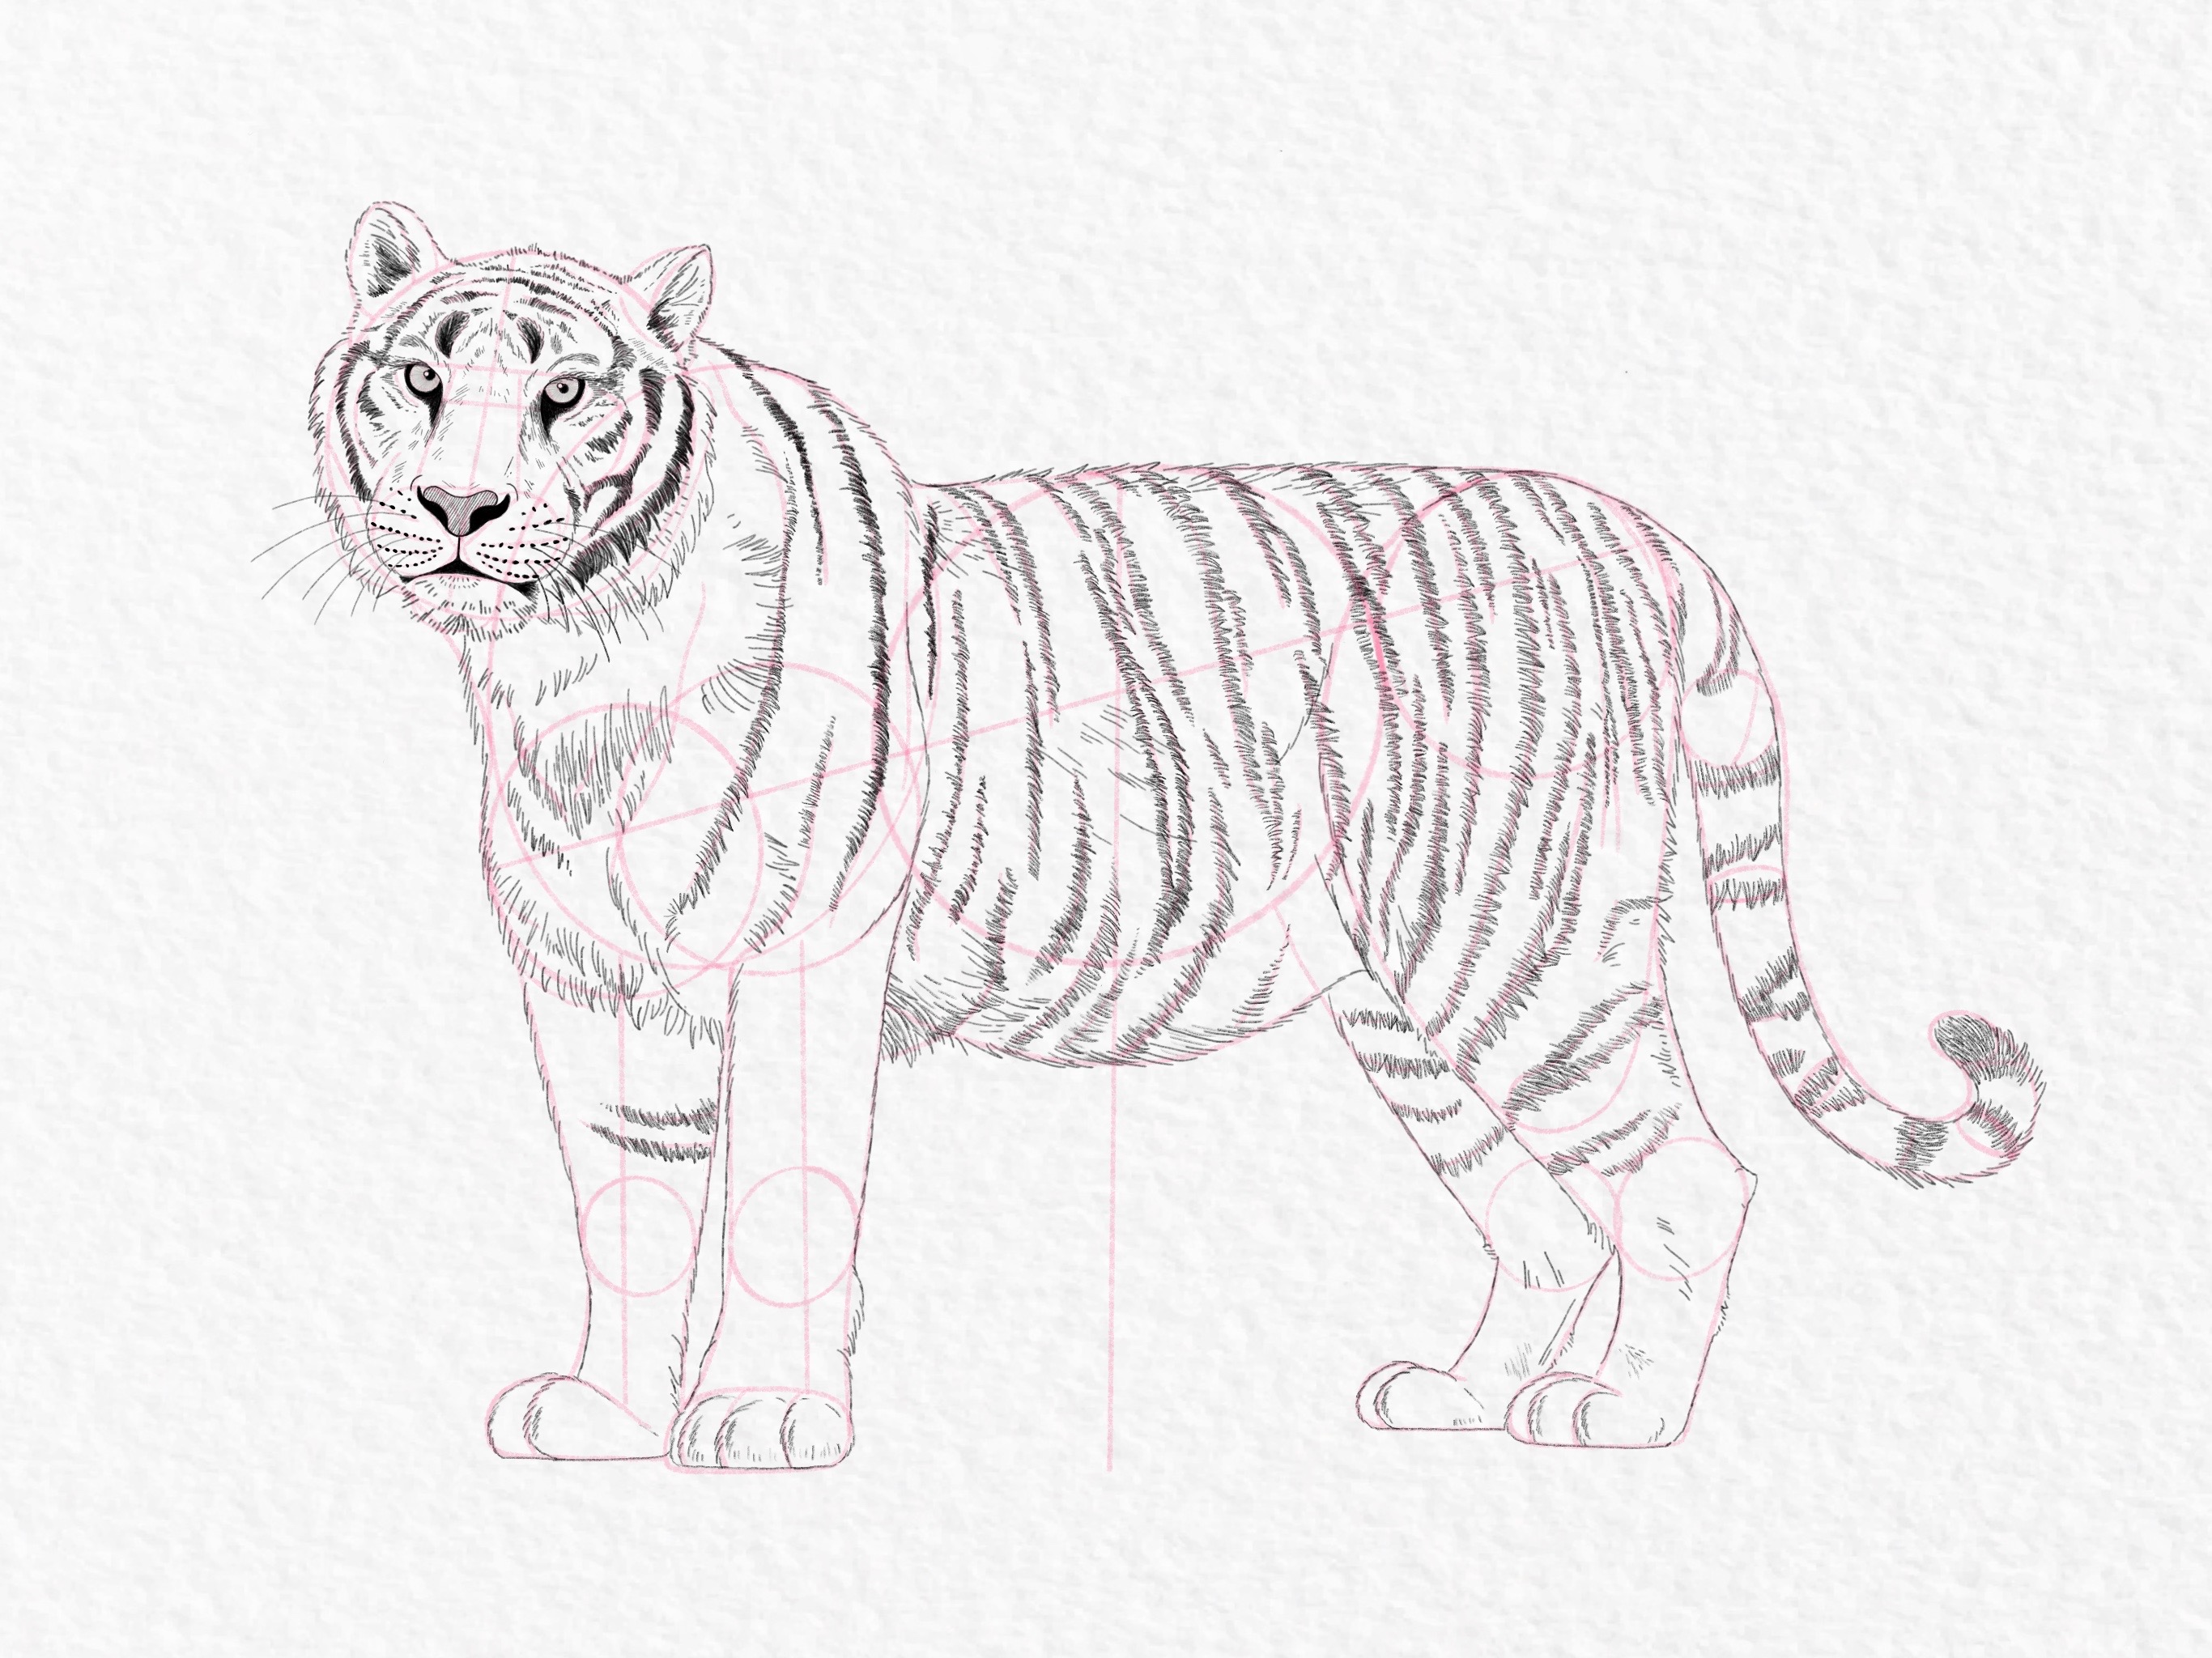 How to draw a Baby Tiger step by step drawings for beginners